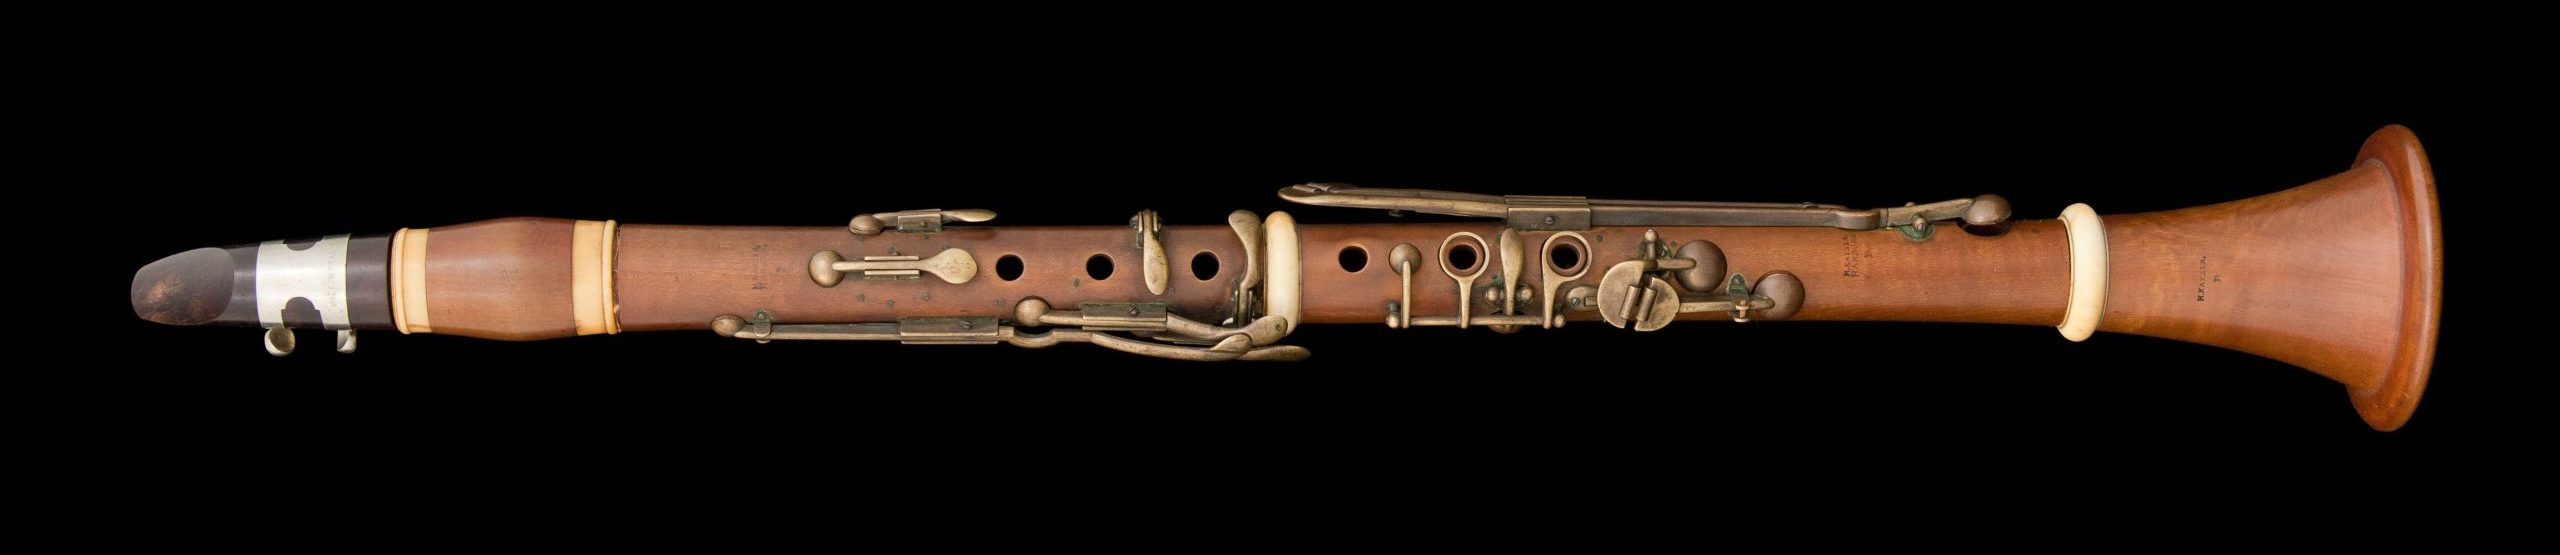 image of a clarinet from the front side